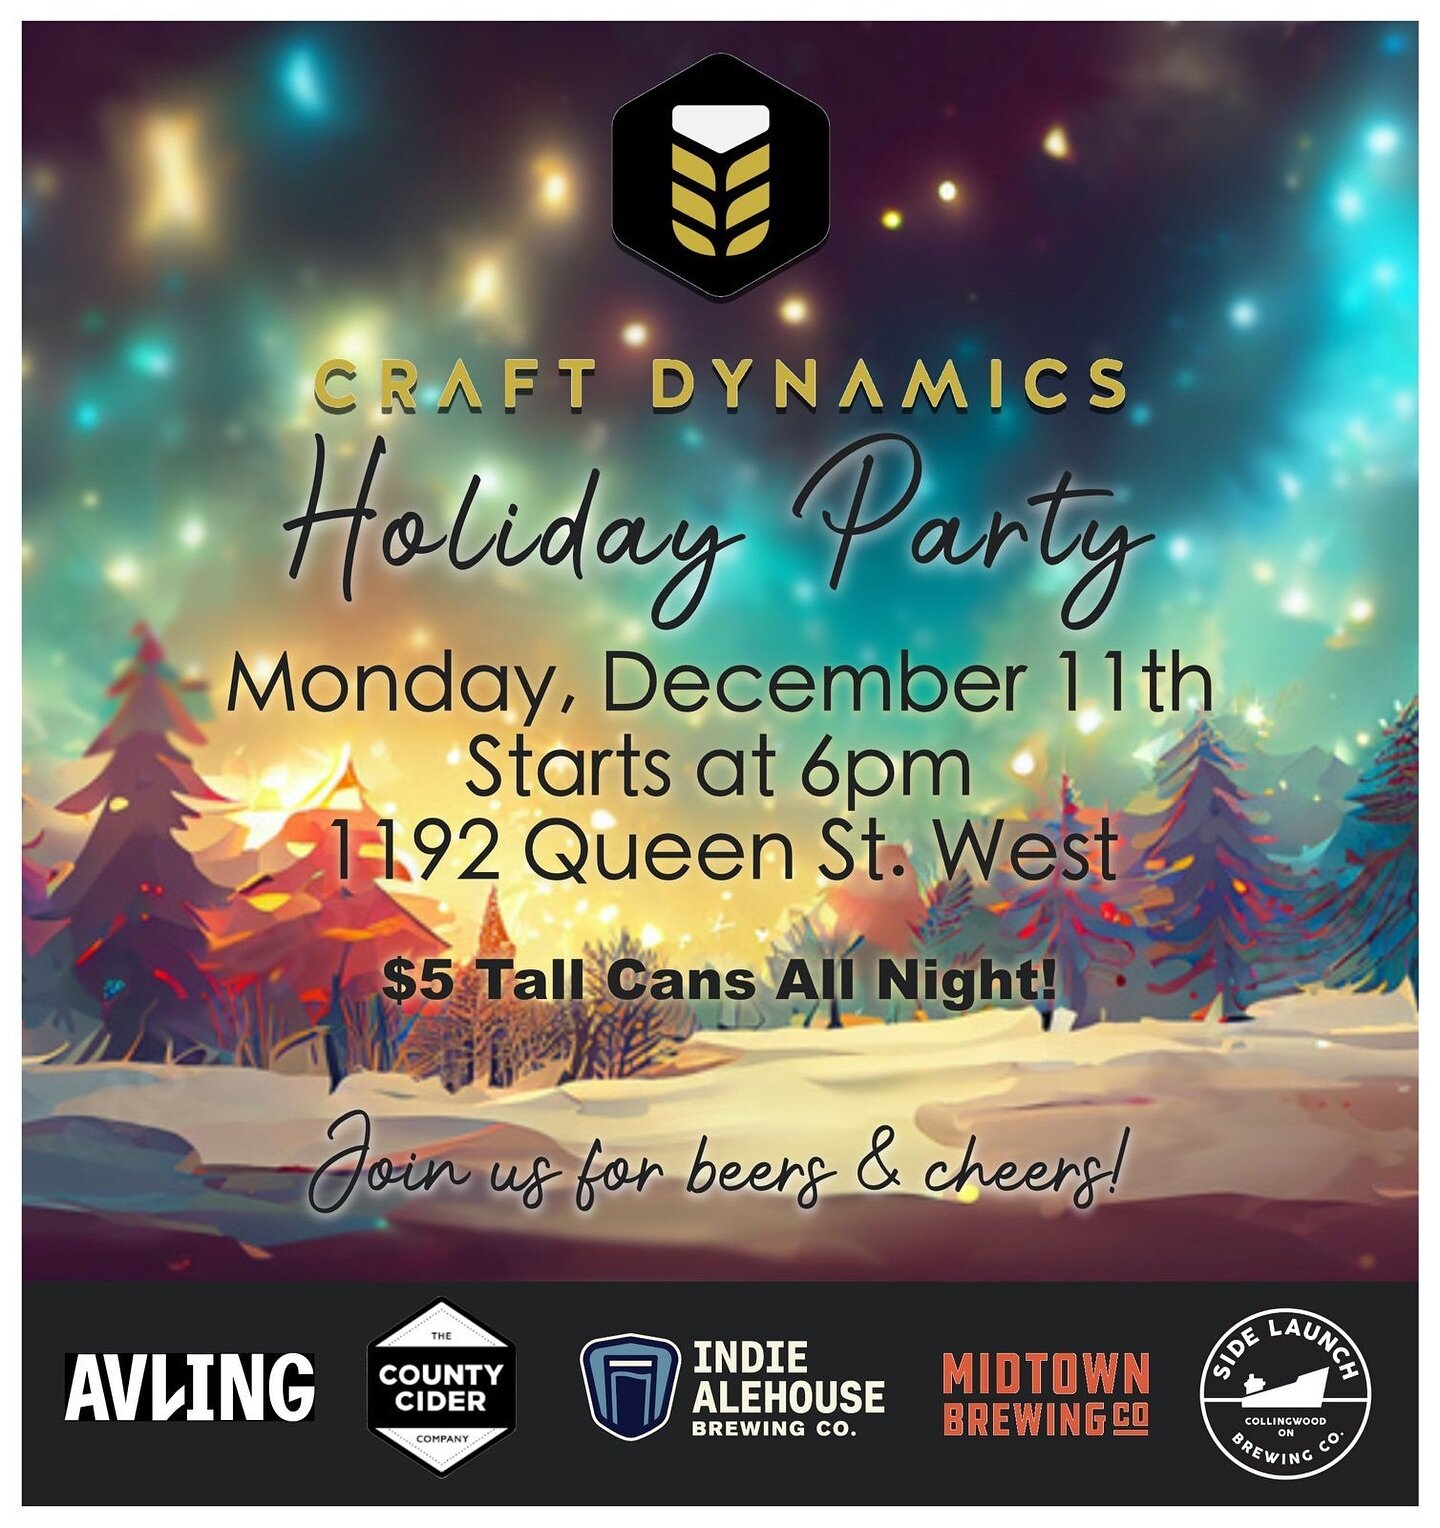 Craft Dynamics wants you to come party with us at Smalls Kitchen 1192 Queens St West TONIGHT December 11th from 6pm onward. $5 cans all night long from our partners. Your presence will make this Christmas Party that much more Awesome. Everyone welcom